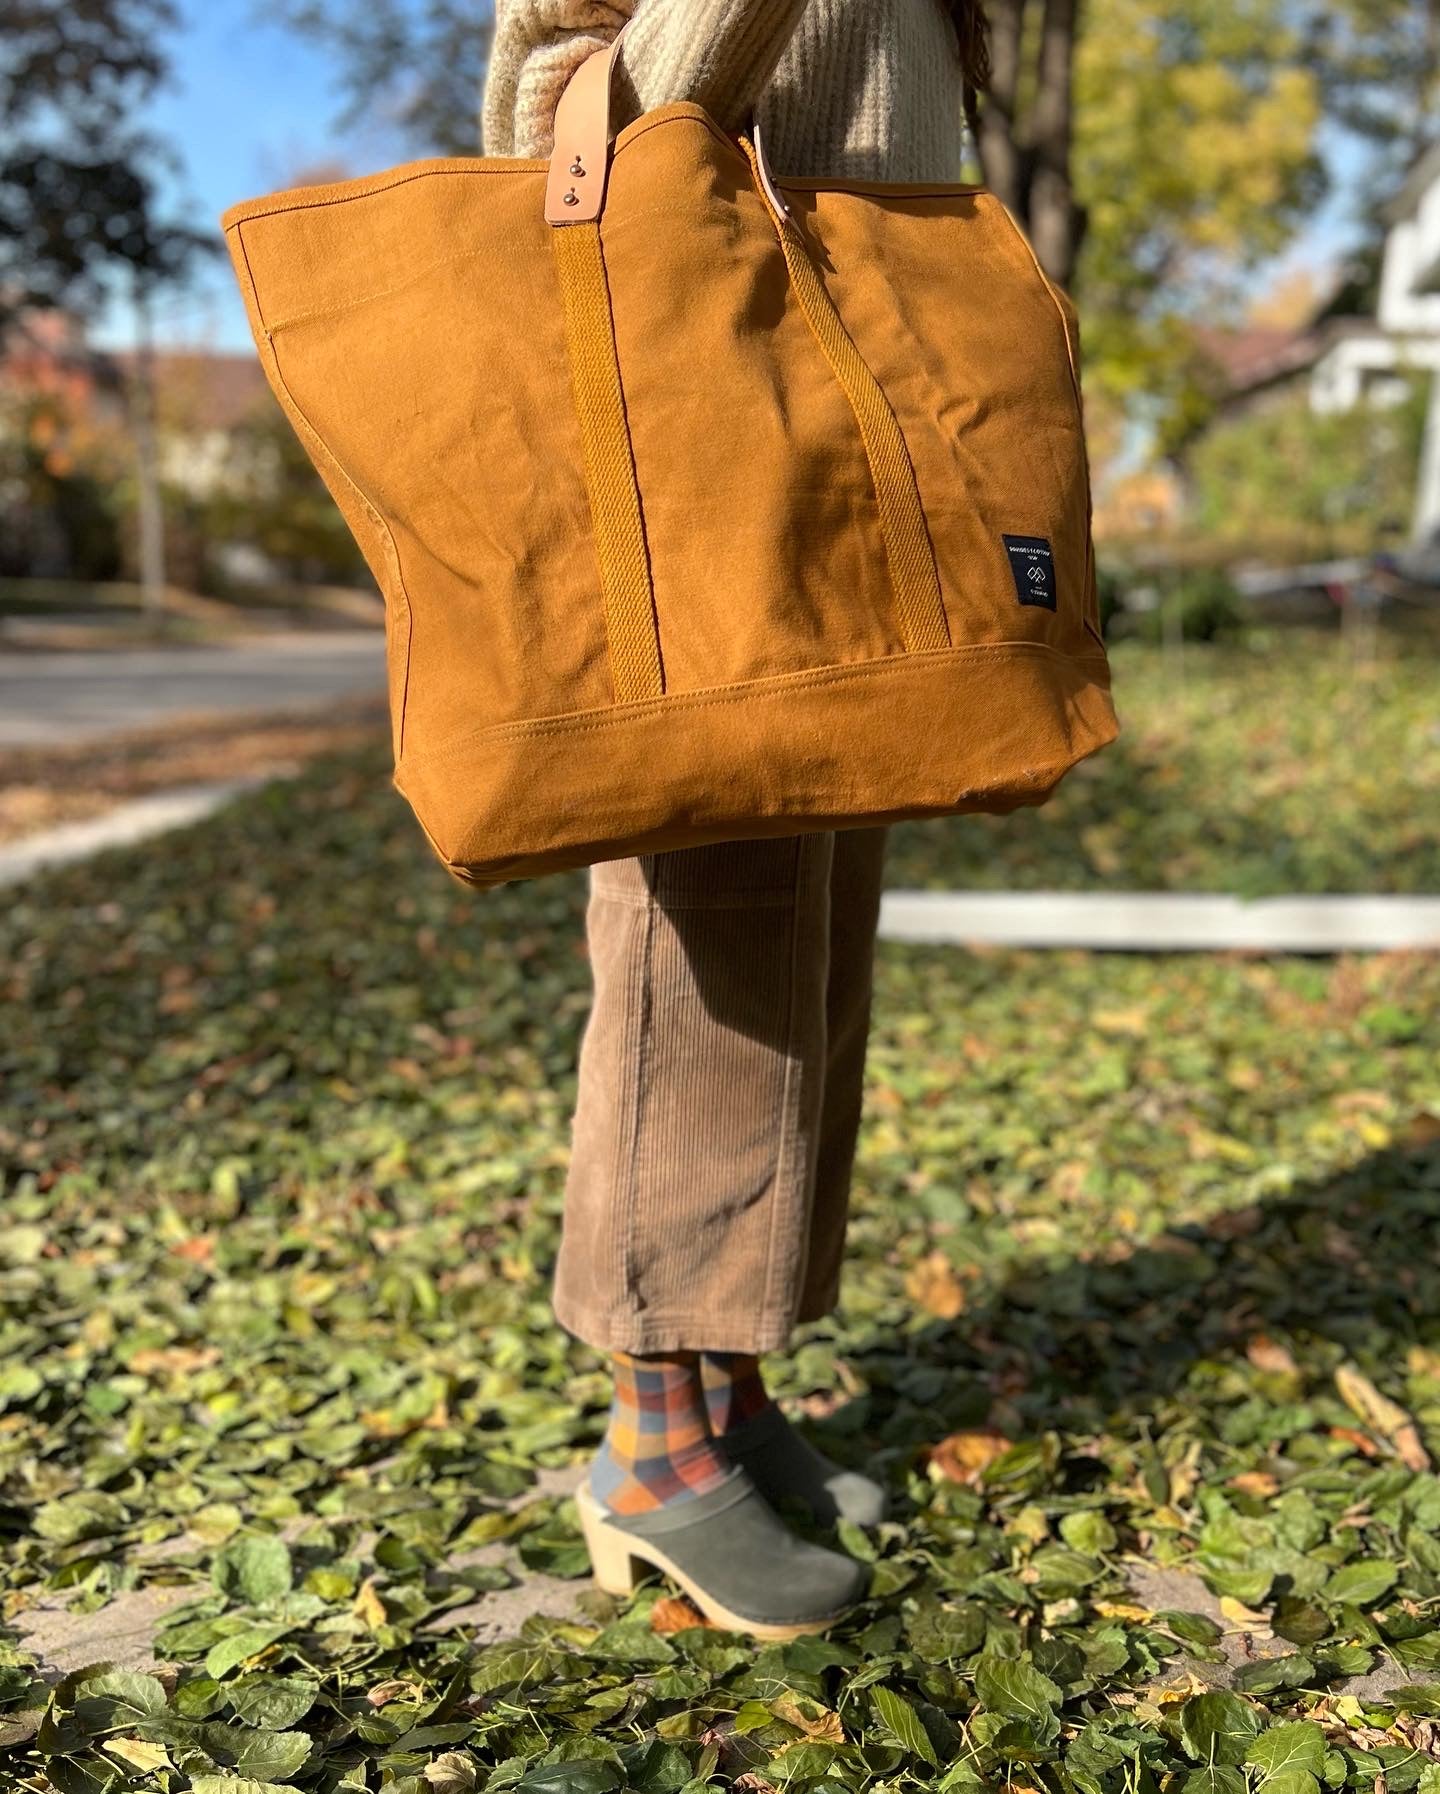 East-West Large Tote, Mustard